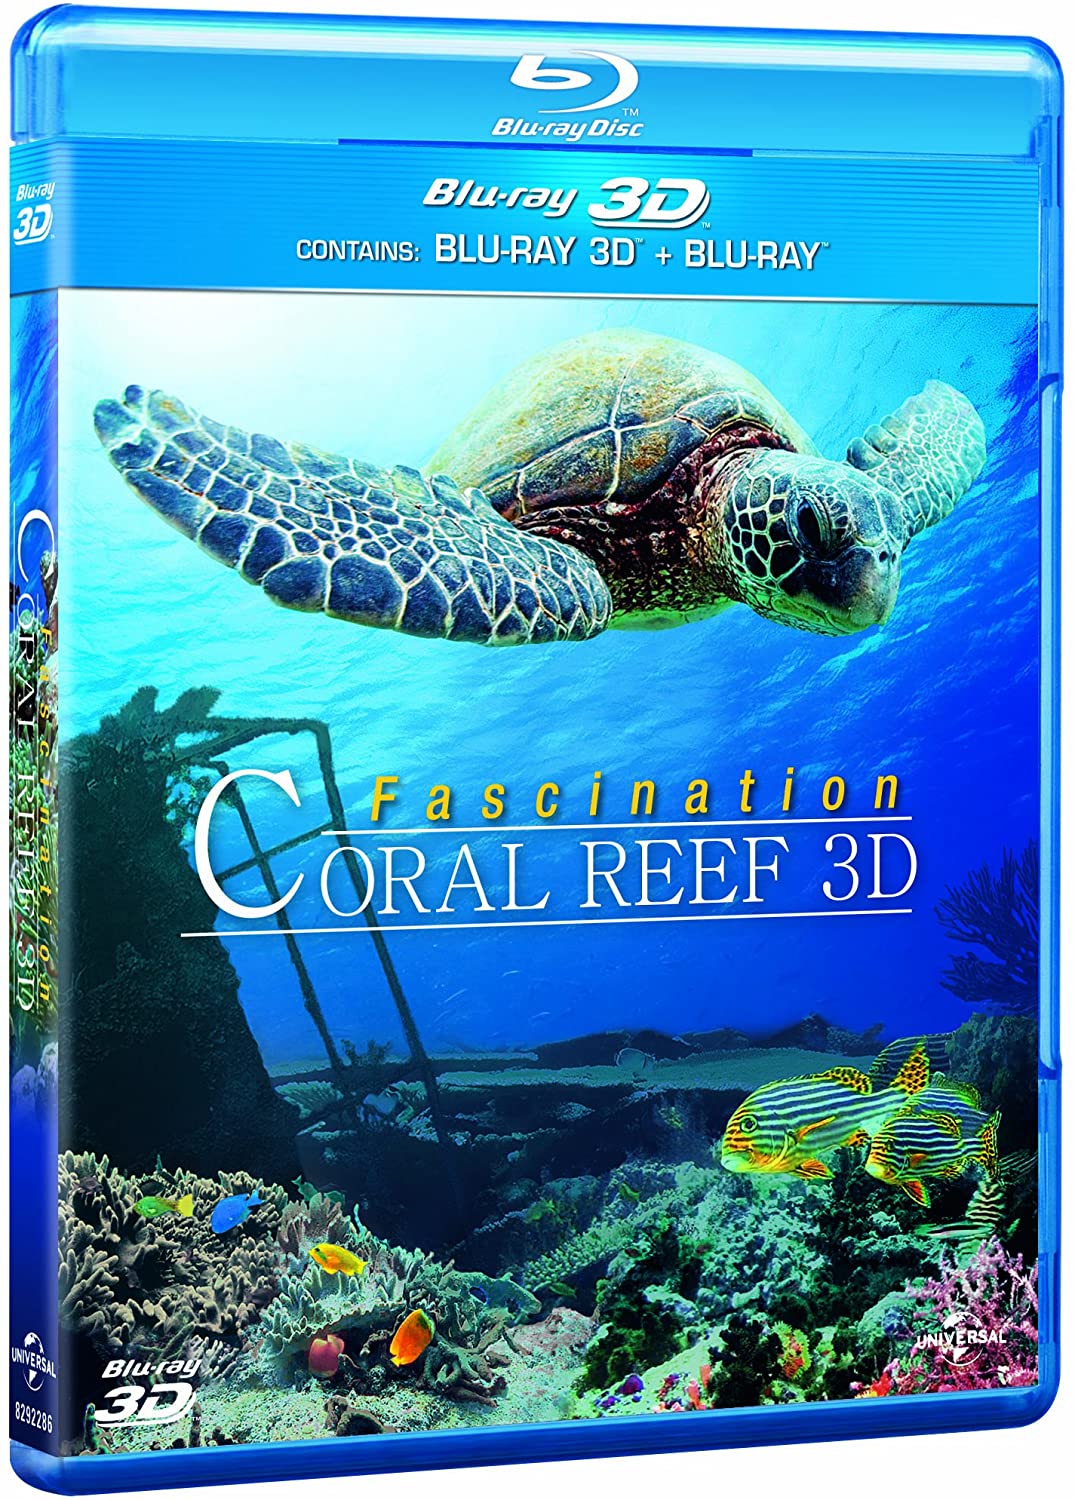 Fascination Coral Reef 3D (3D + 2D Blu-ray)